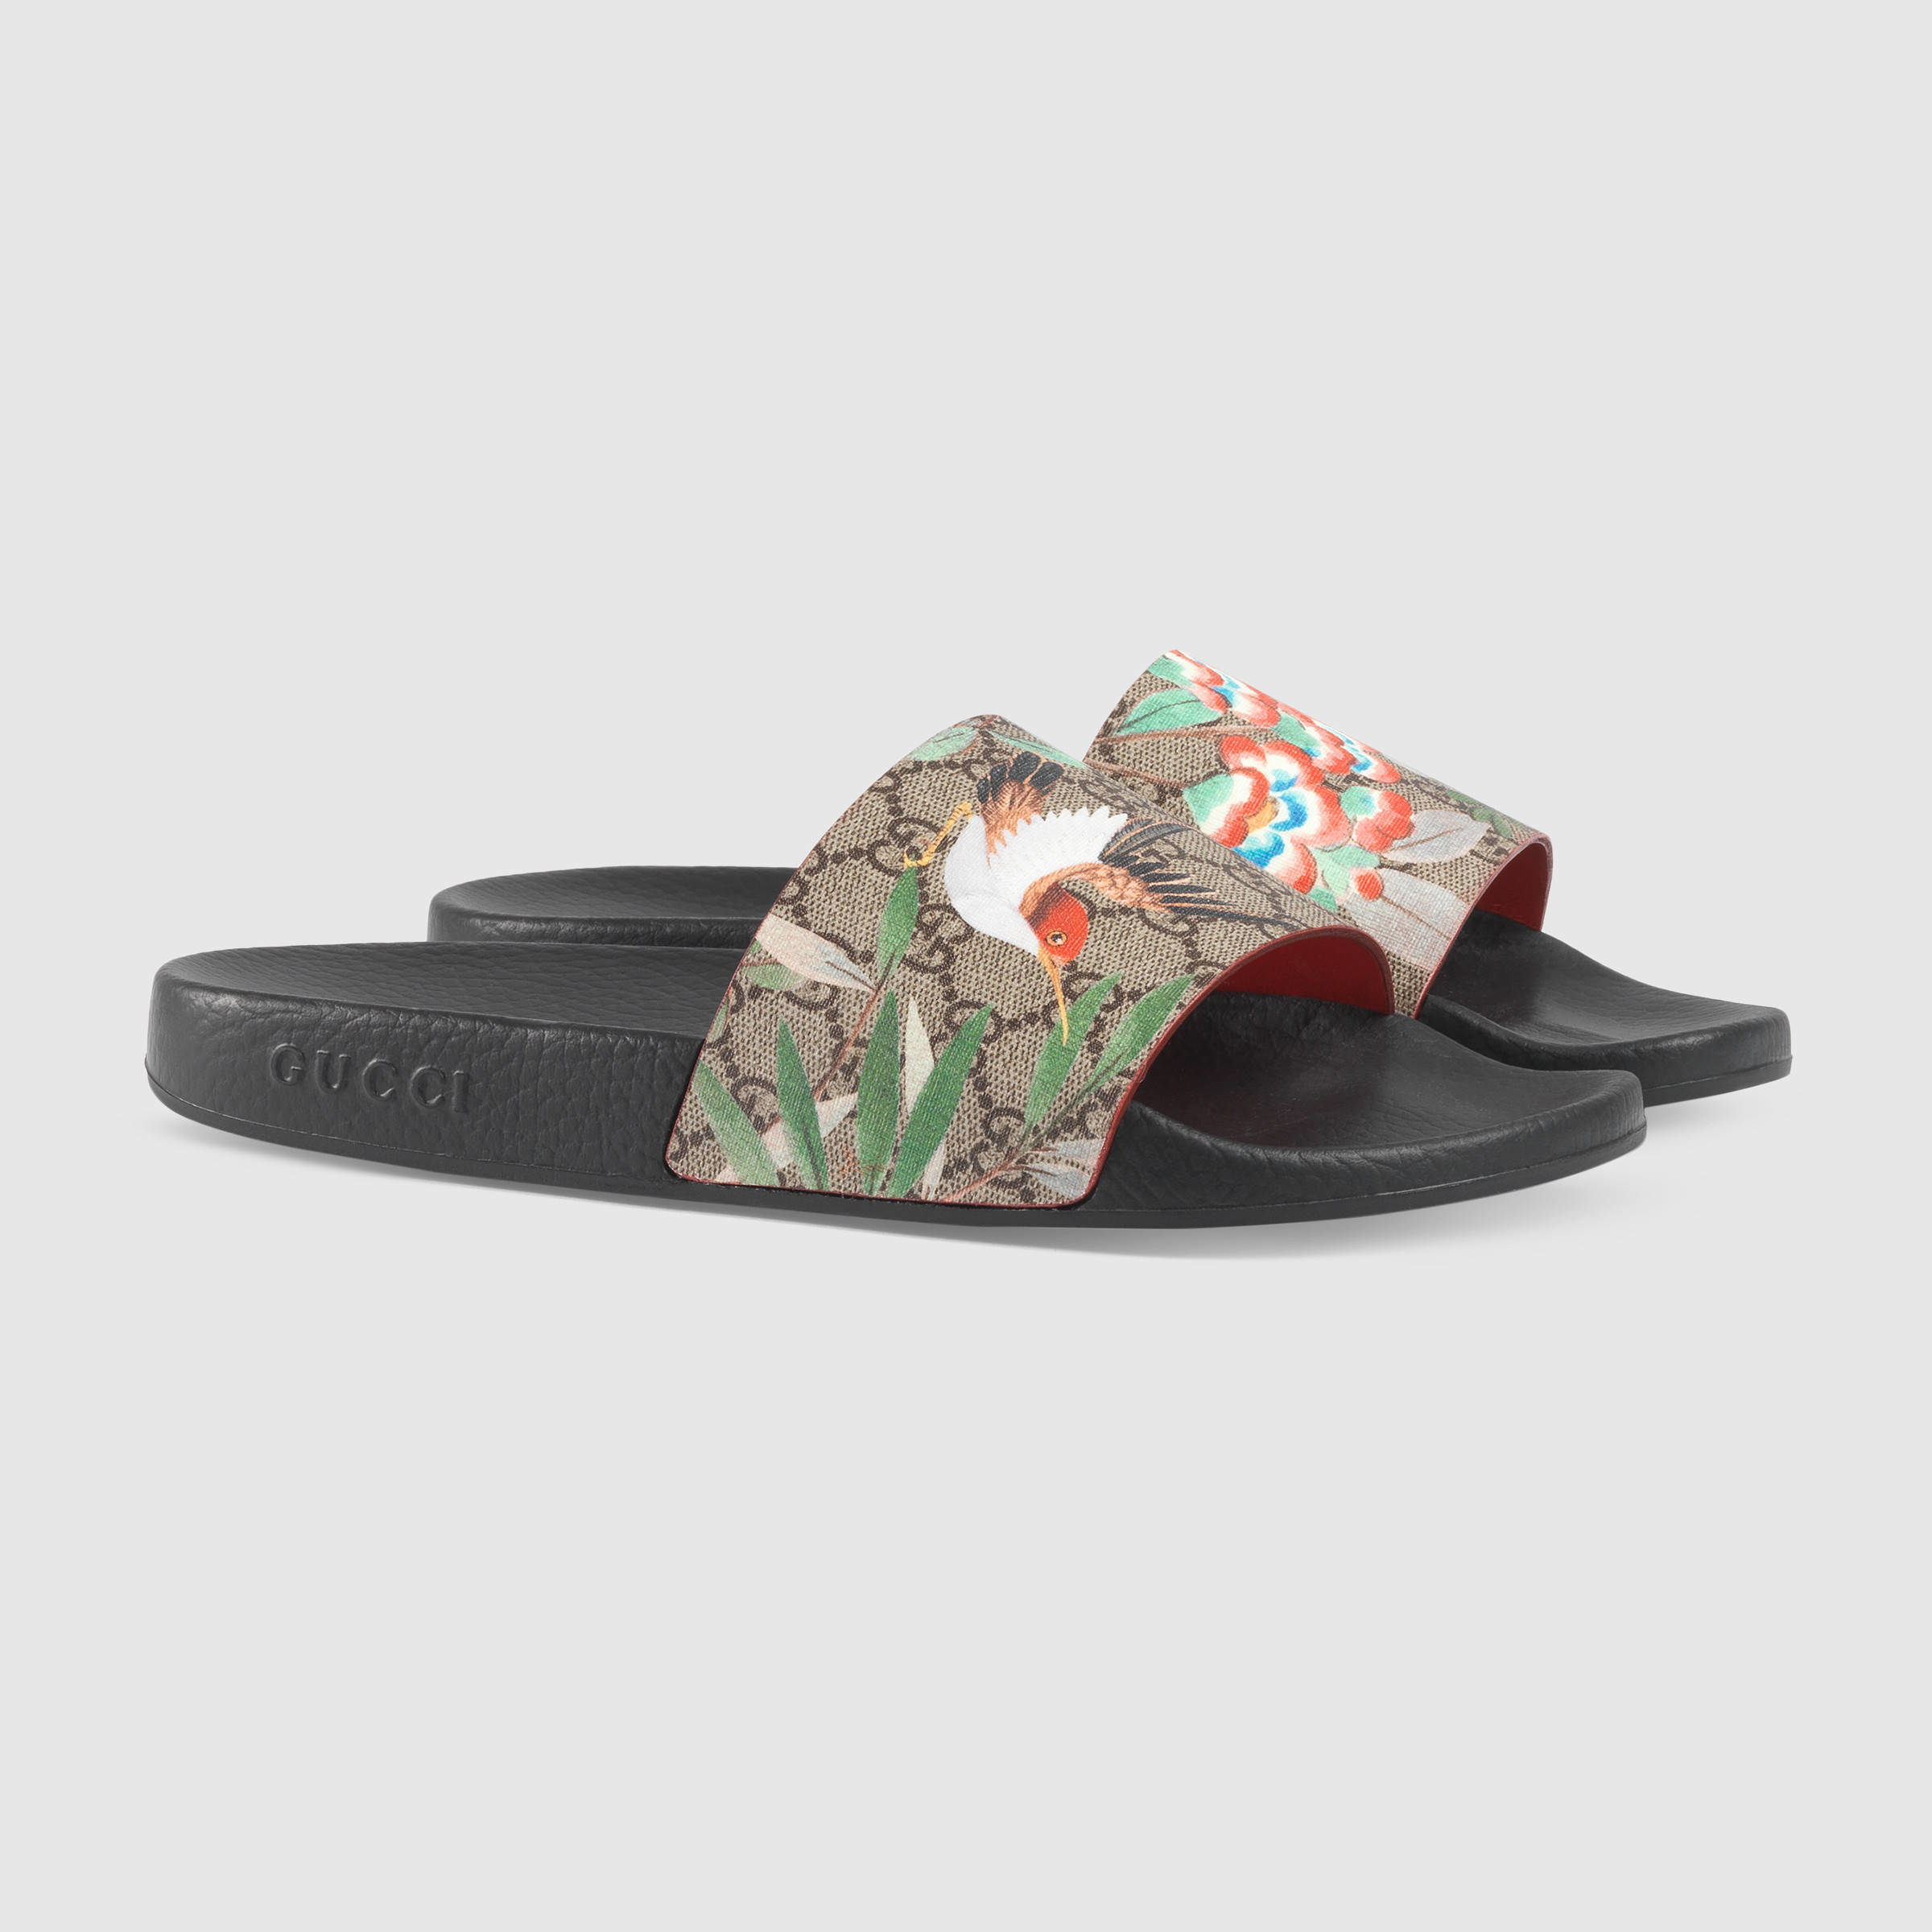 Gucci Canvas Tian Printed Slides for 